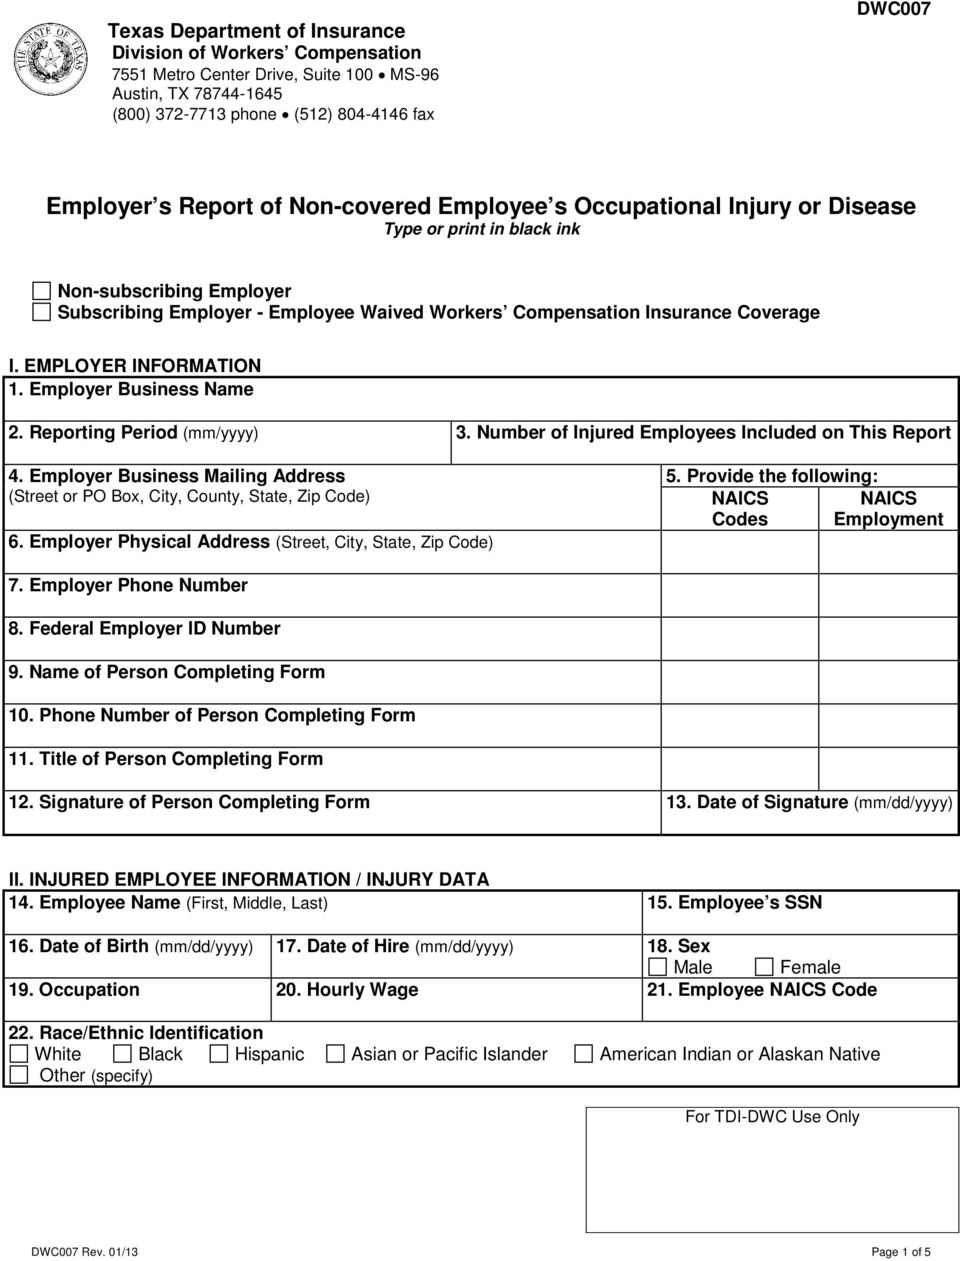 EMPLOYER INFORMATION 1. Employer Business Name 2. Reporting Period (mm/yyyy) 3. Number of Injured Employees Included on This Report 4.